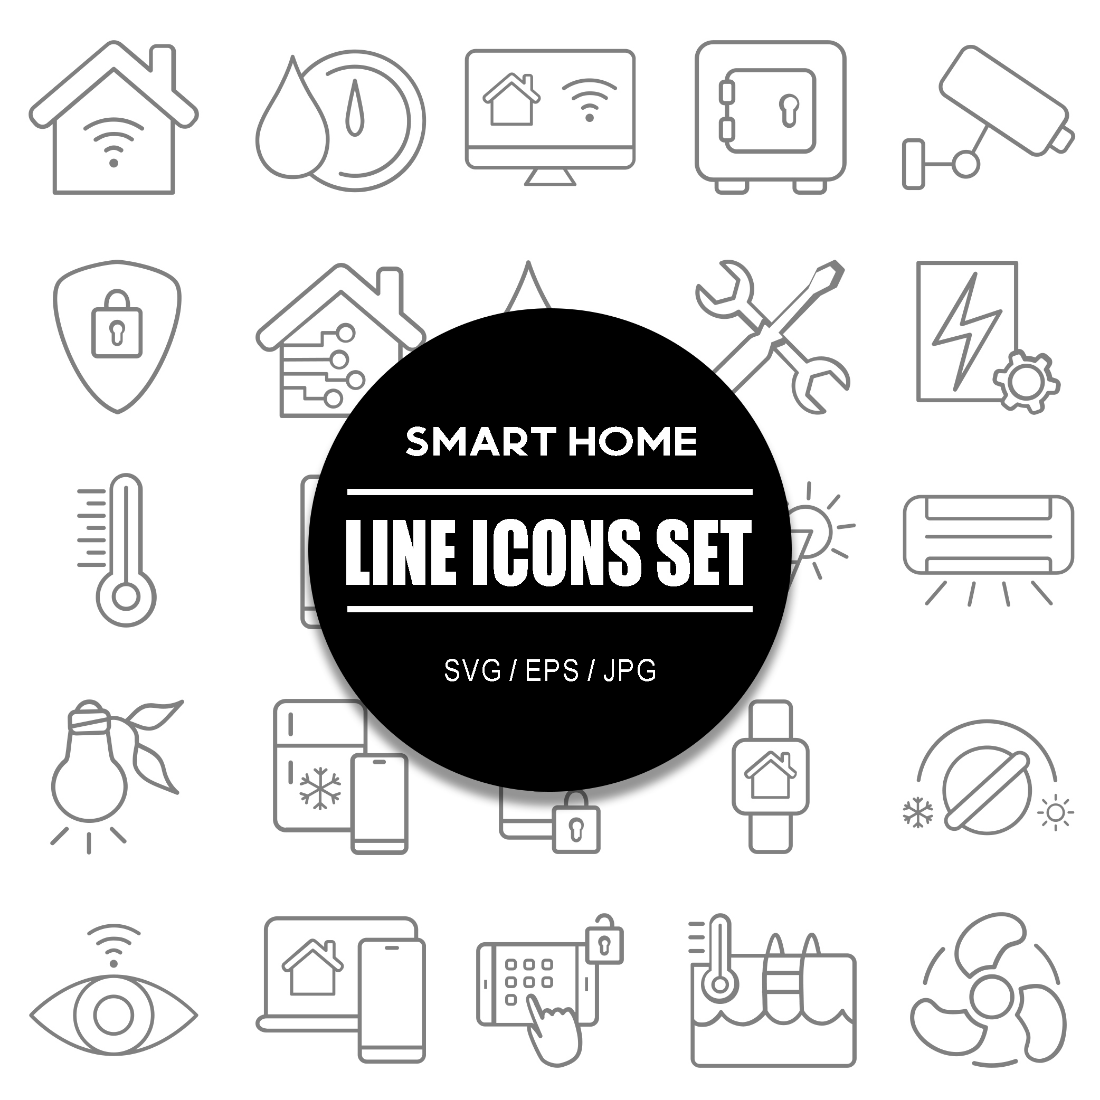 Smart Home Line Icon Set cover image.